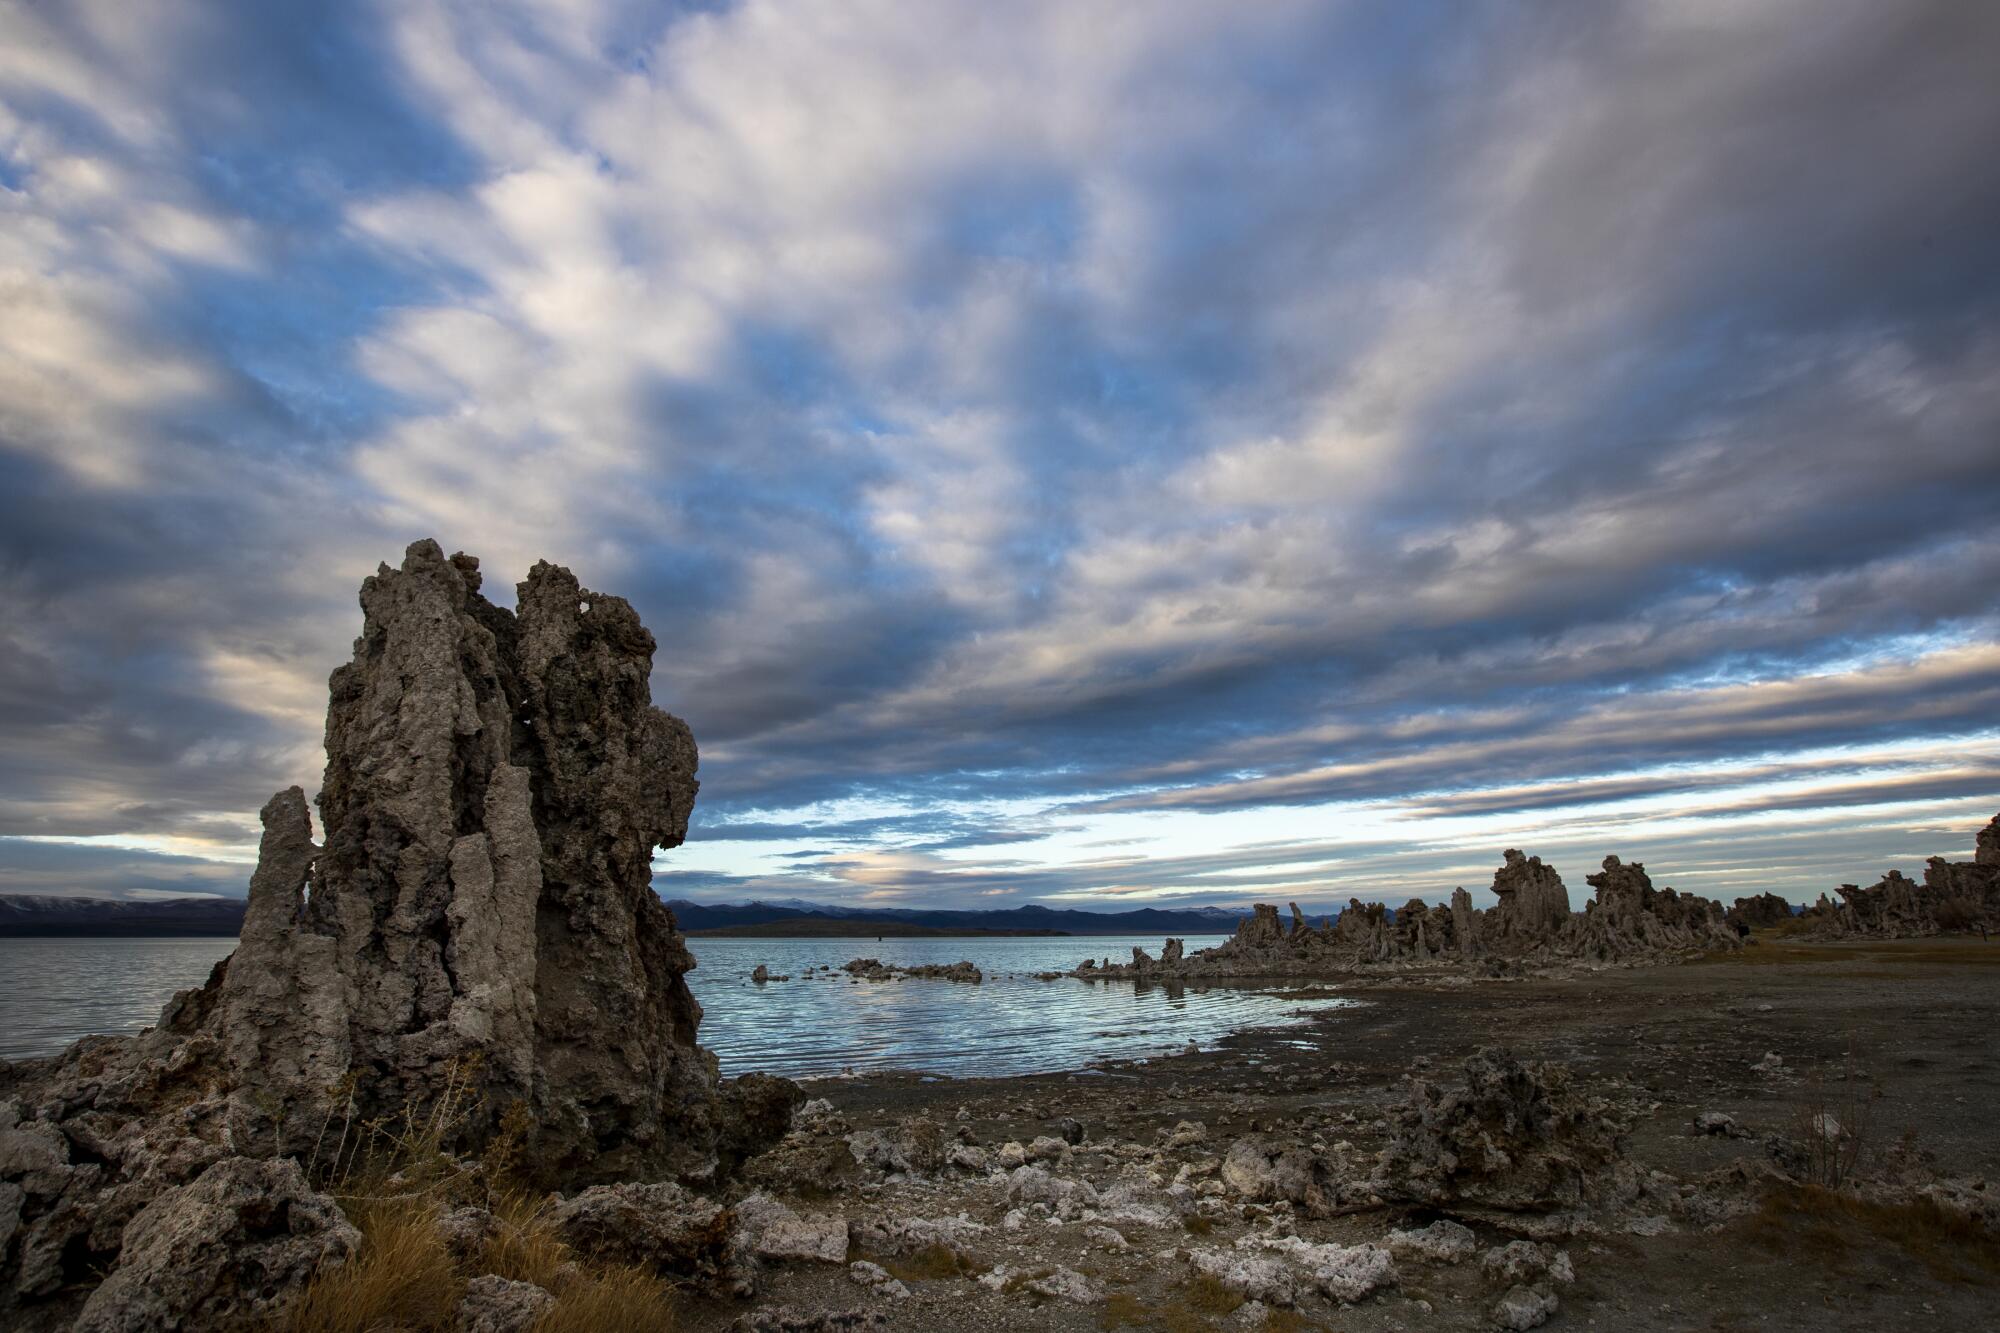 Passing clouds provide a backdrop for exposed tufa towers along the shore of Mono Lake.